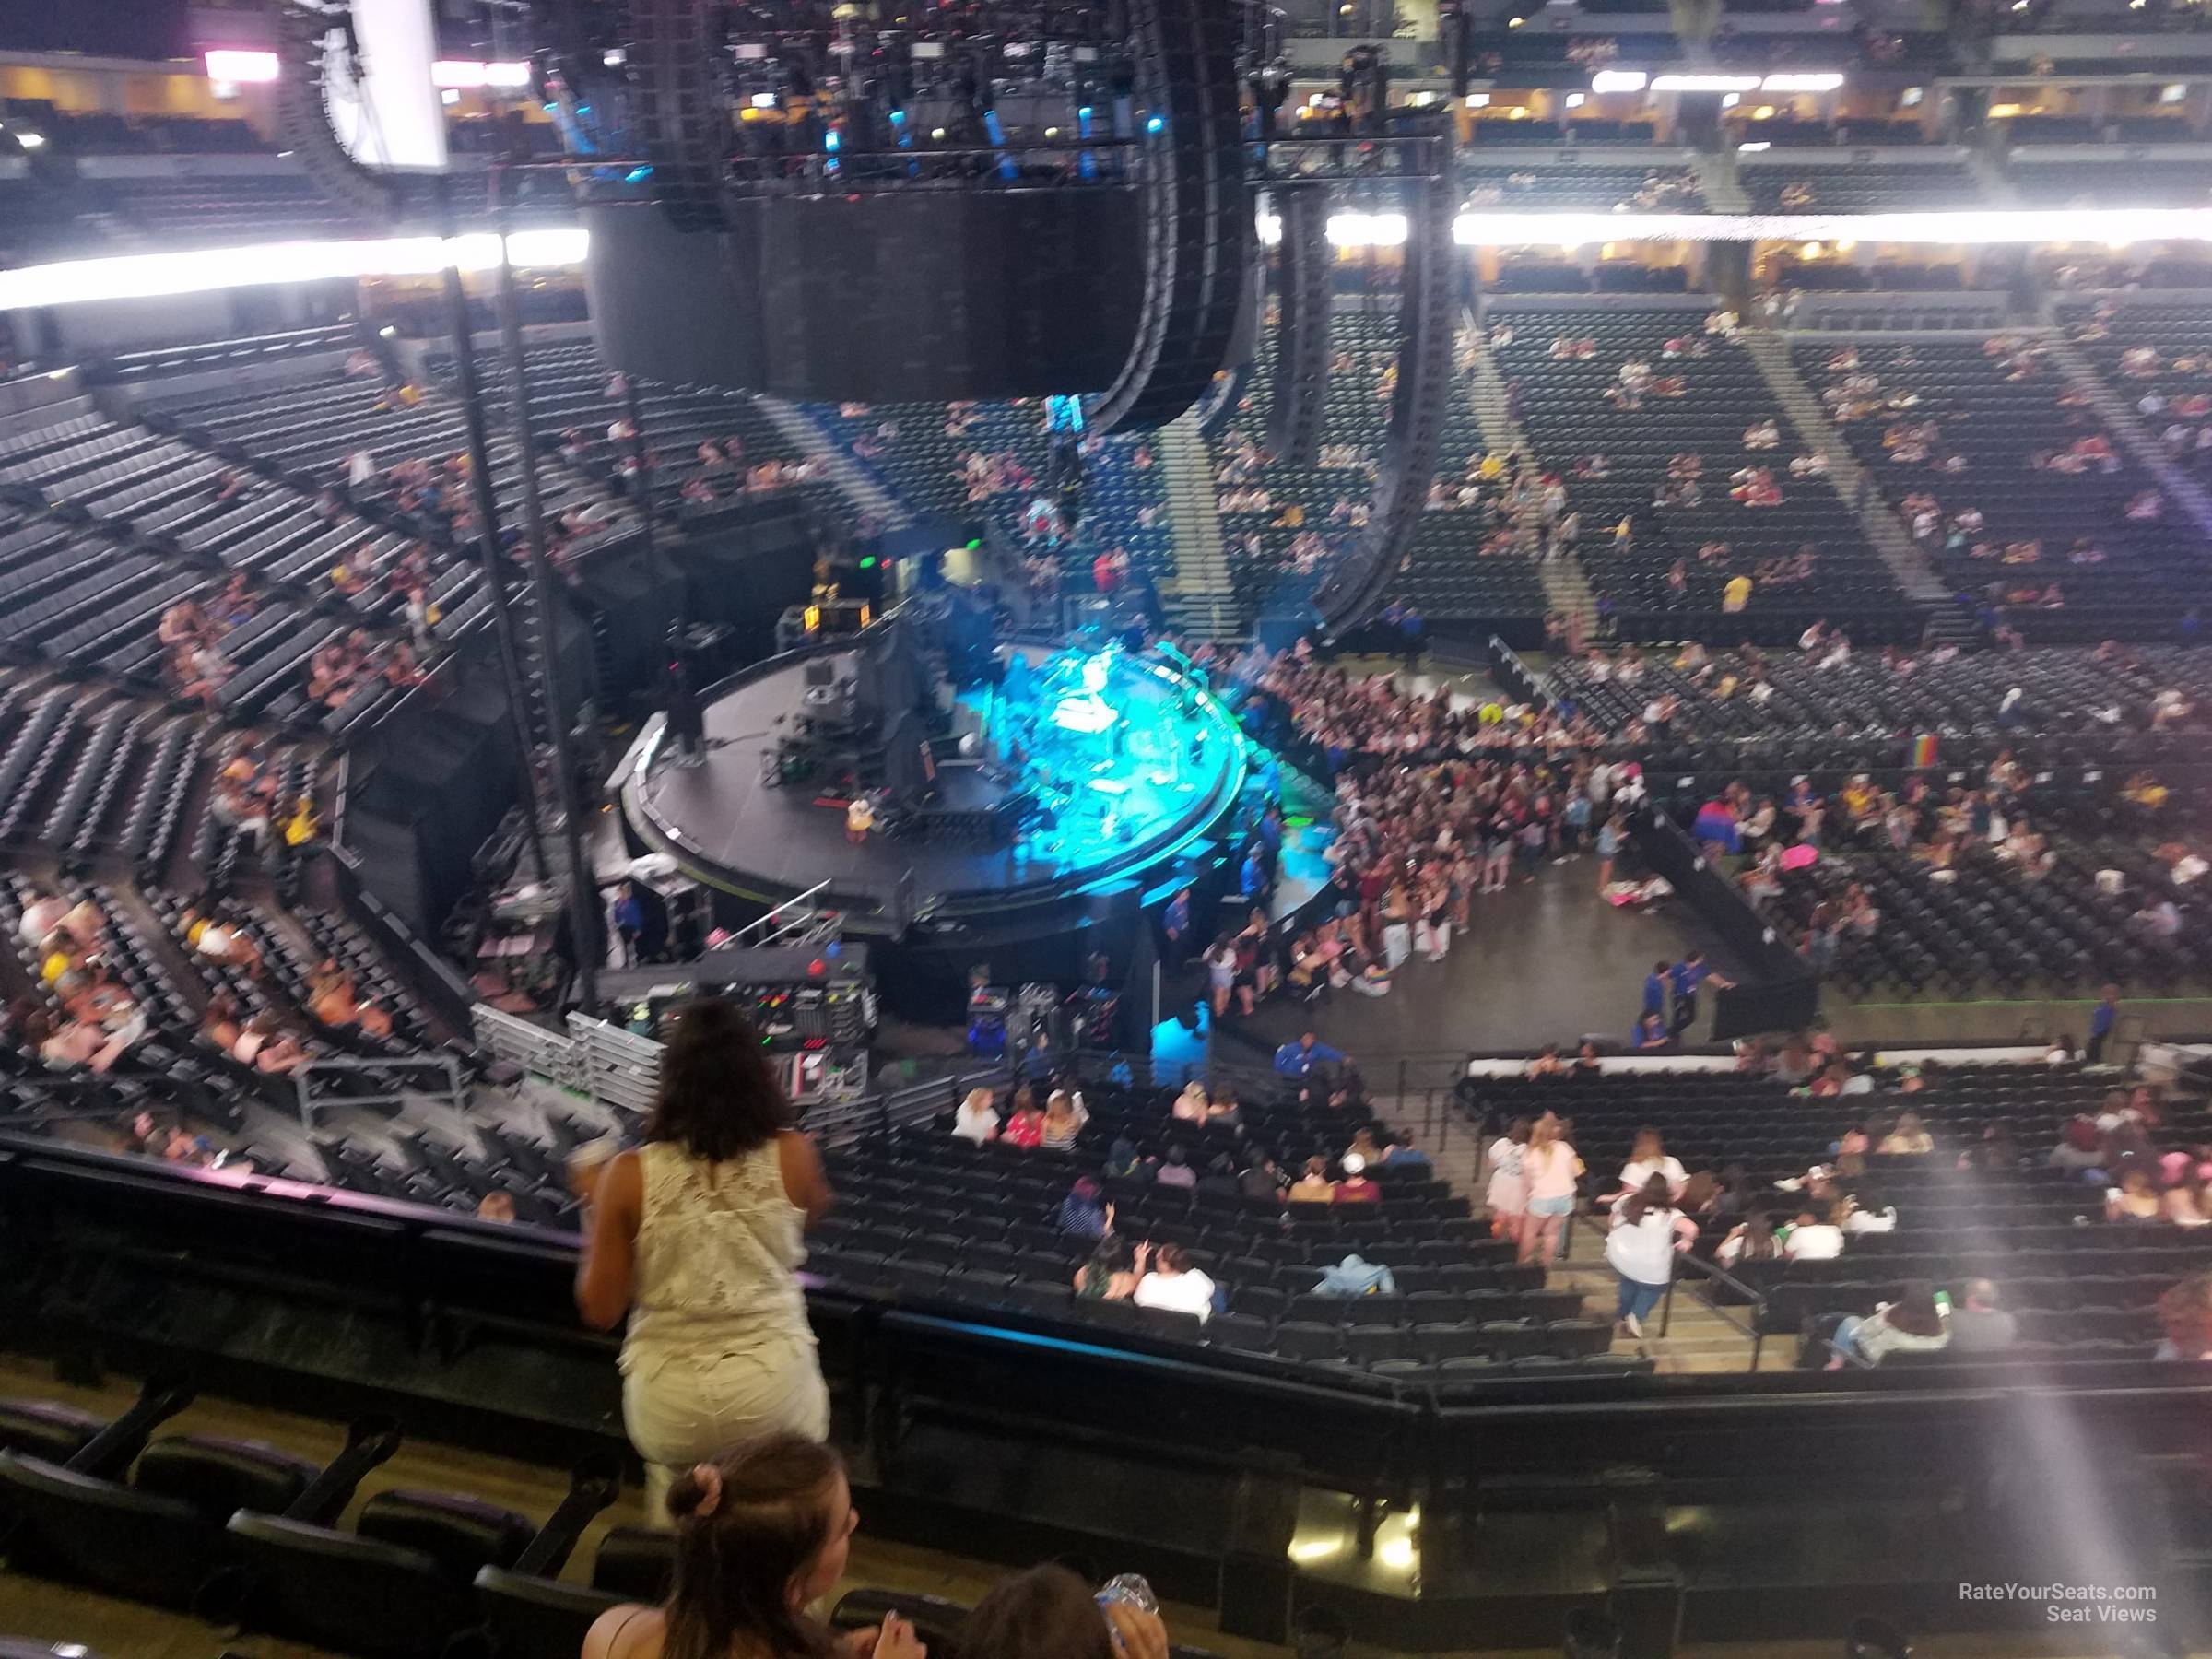 section 236, row 4 seat view  for concert - ball arena